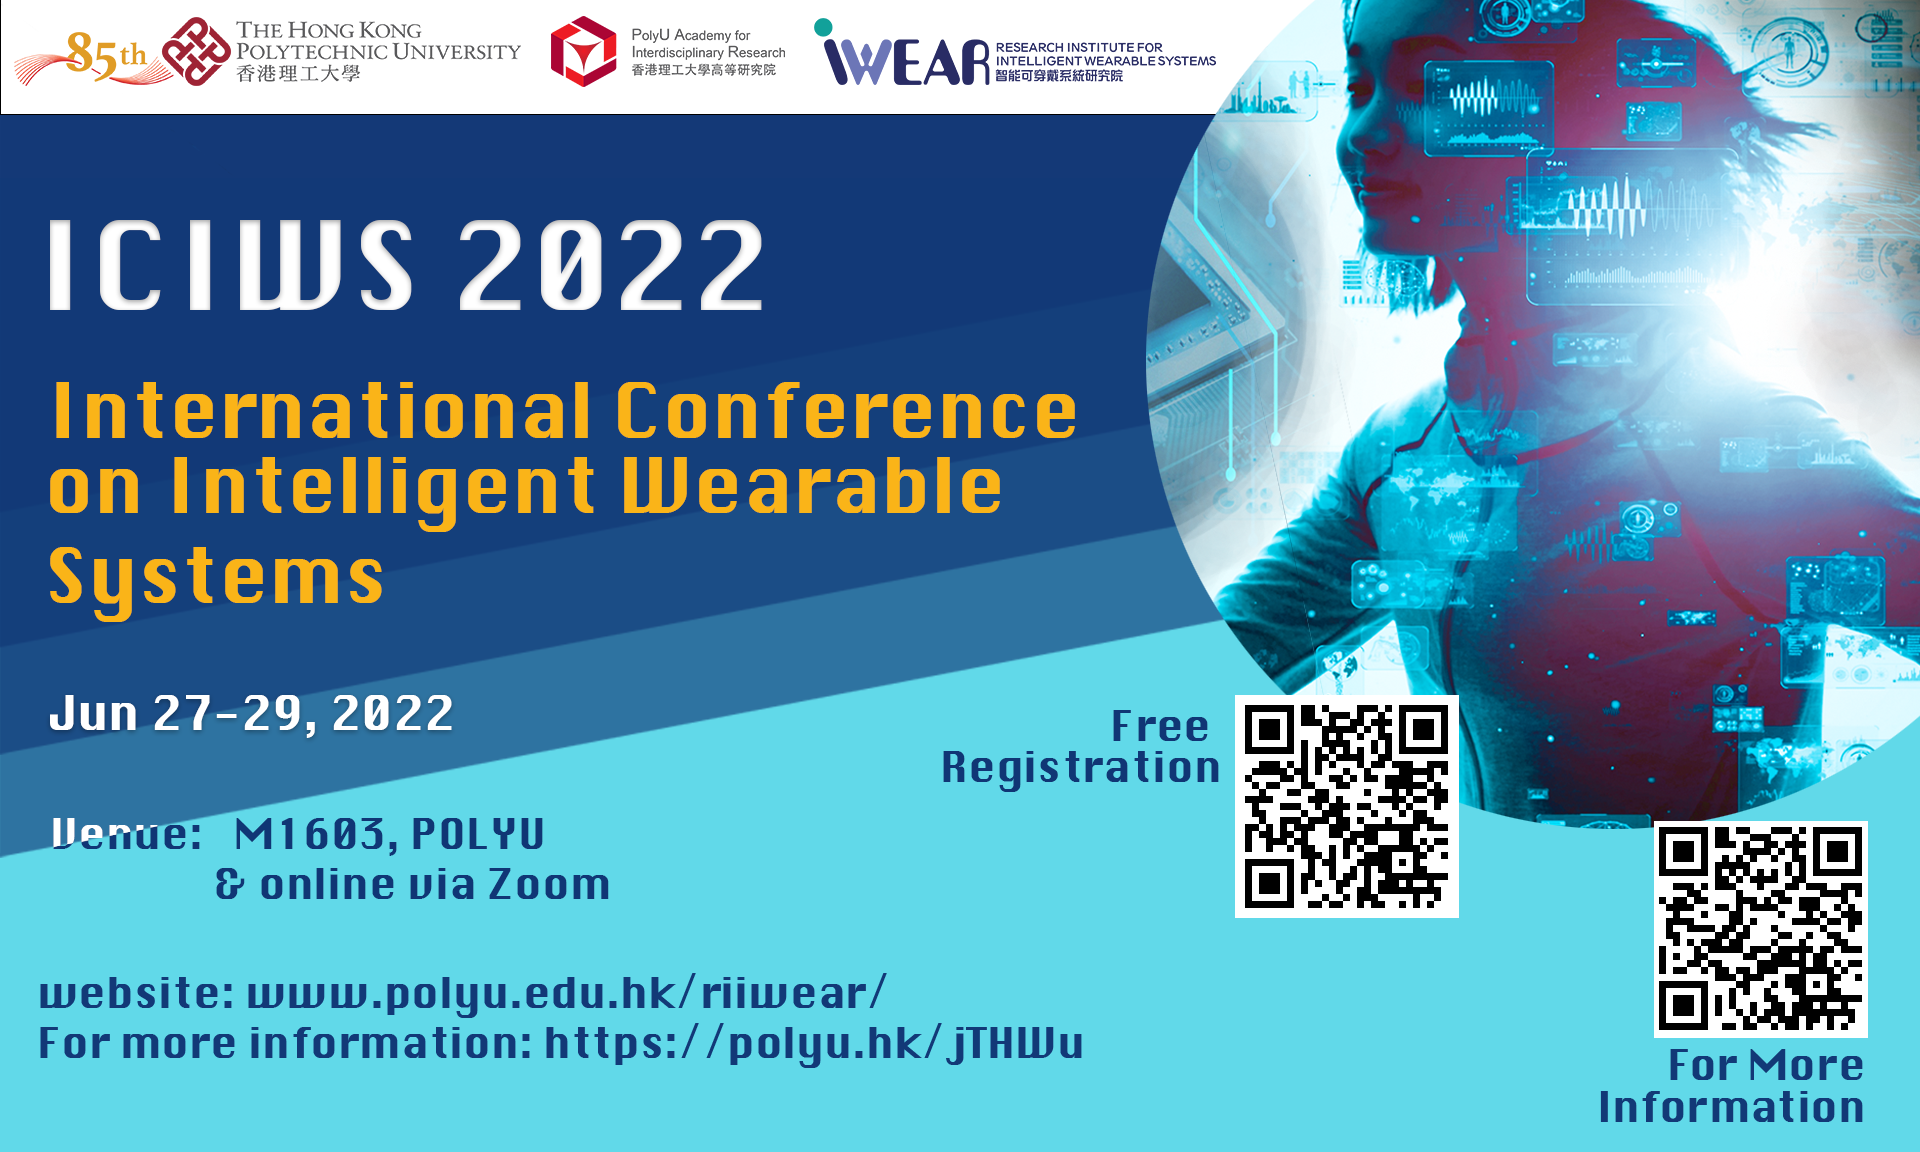 International Conference on Intelligent Wearable Systems